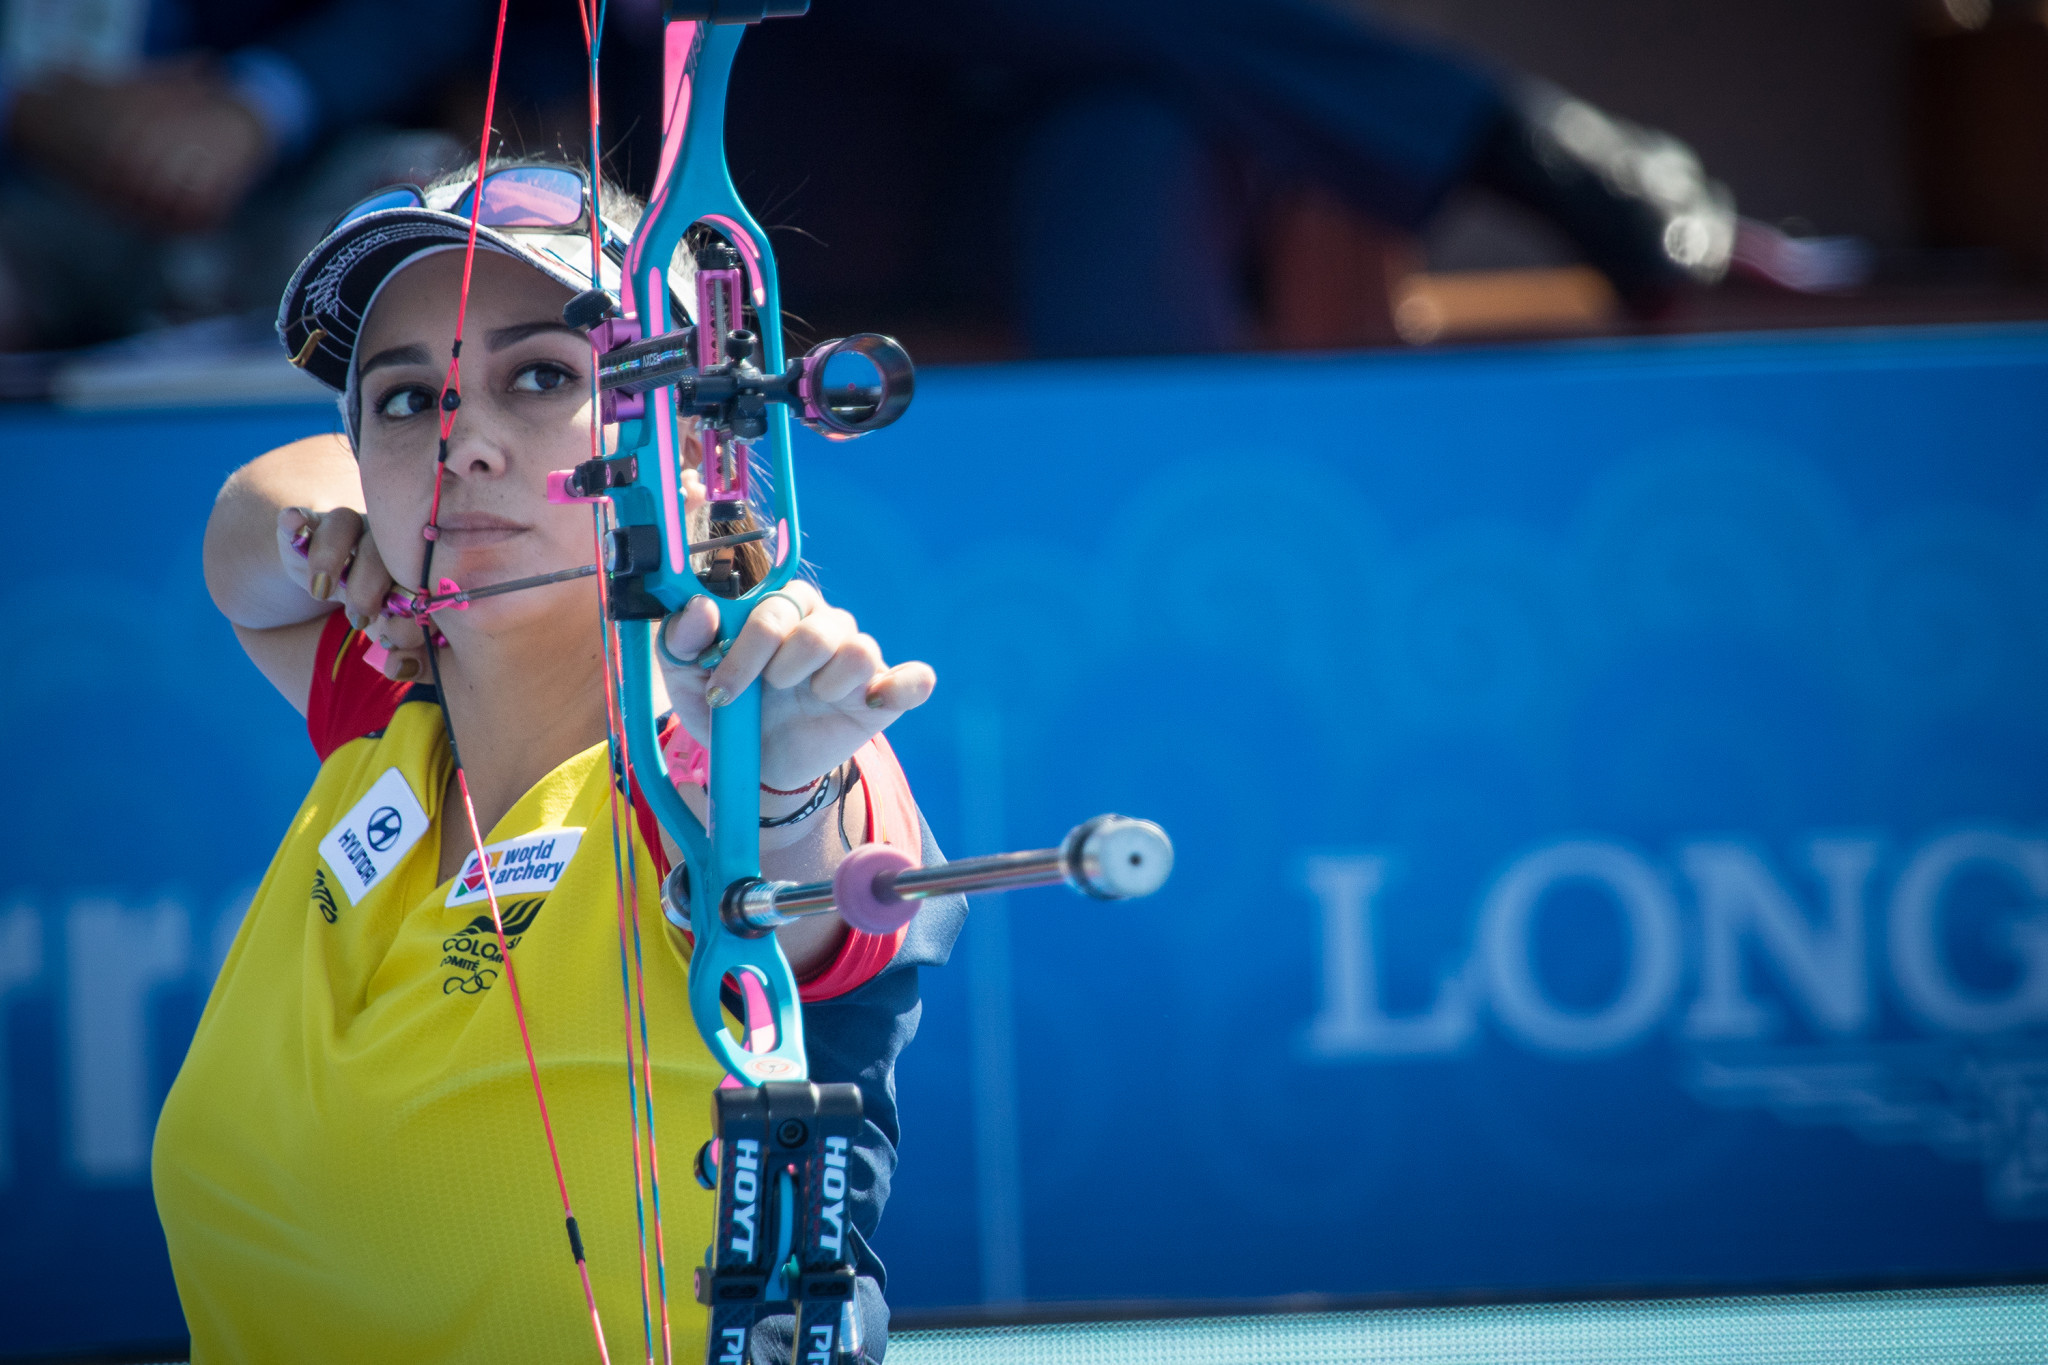 López aiming for best possible start to season at home Archery World Cup in Medellin